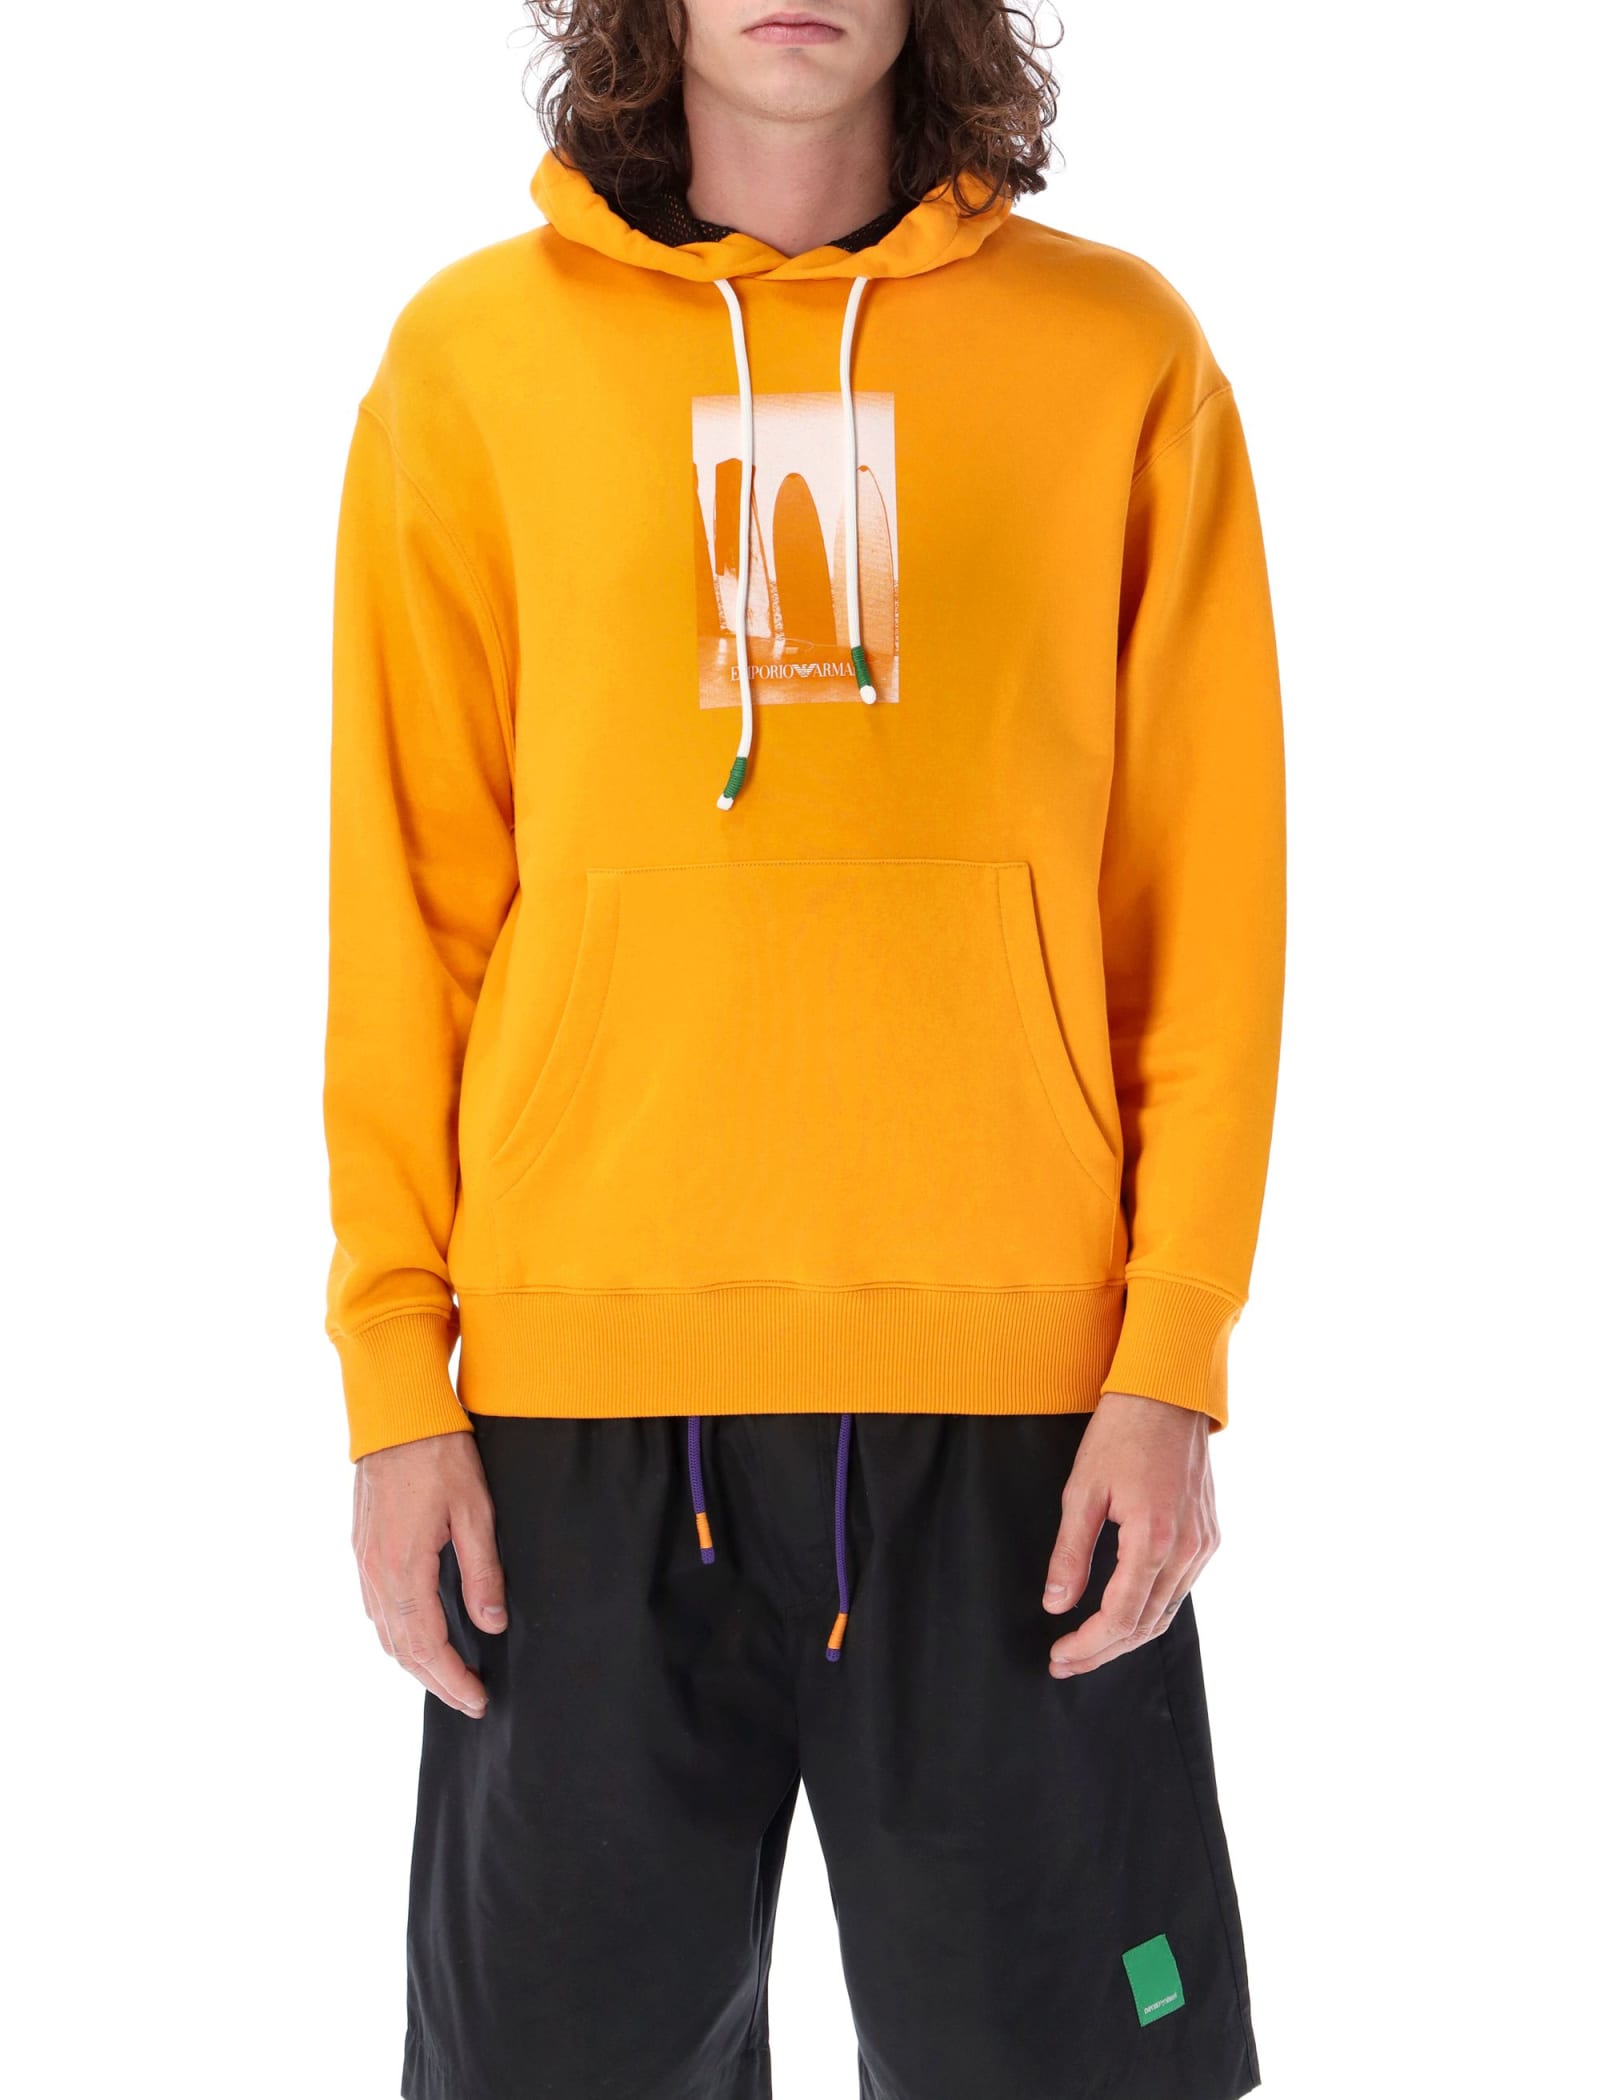 EMPORIO ARMANI SUSTAINABLE COLLECTION FRENCH TERRYCLOTH HOODIE